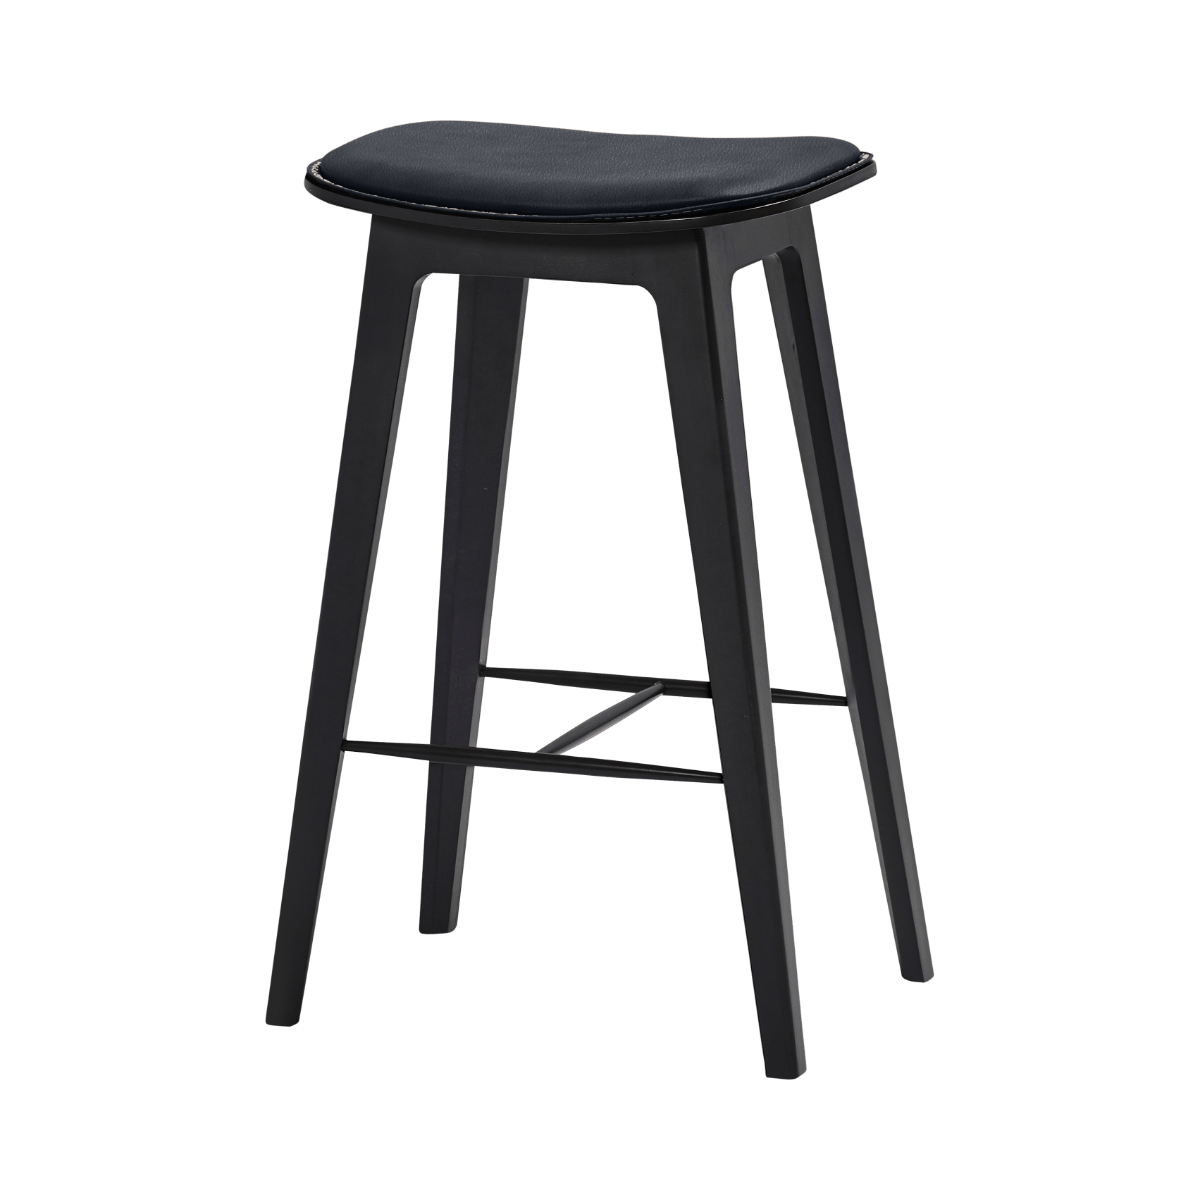 variant_8594310% | Nordic Bar Stool - Beech with stitches [Contract] - 68 cm Terra Black | SACKit